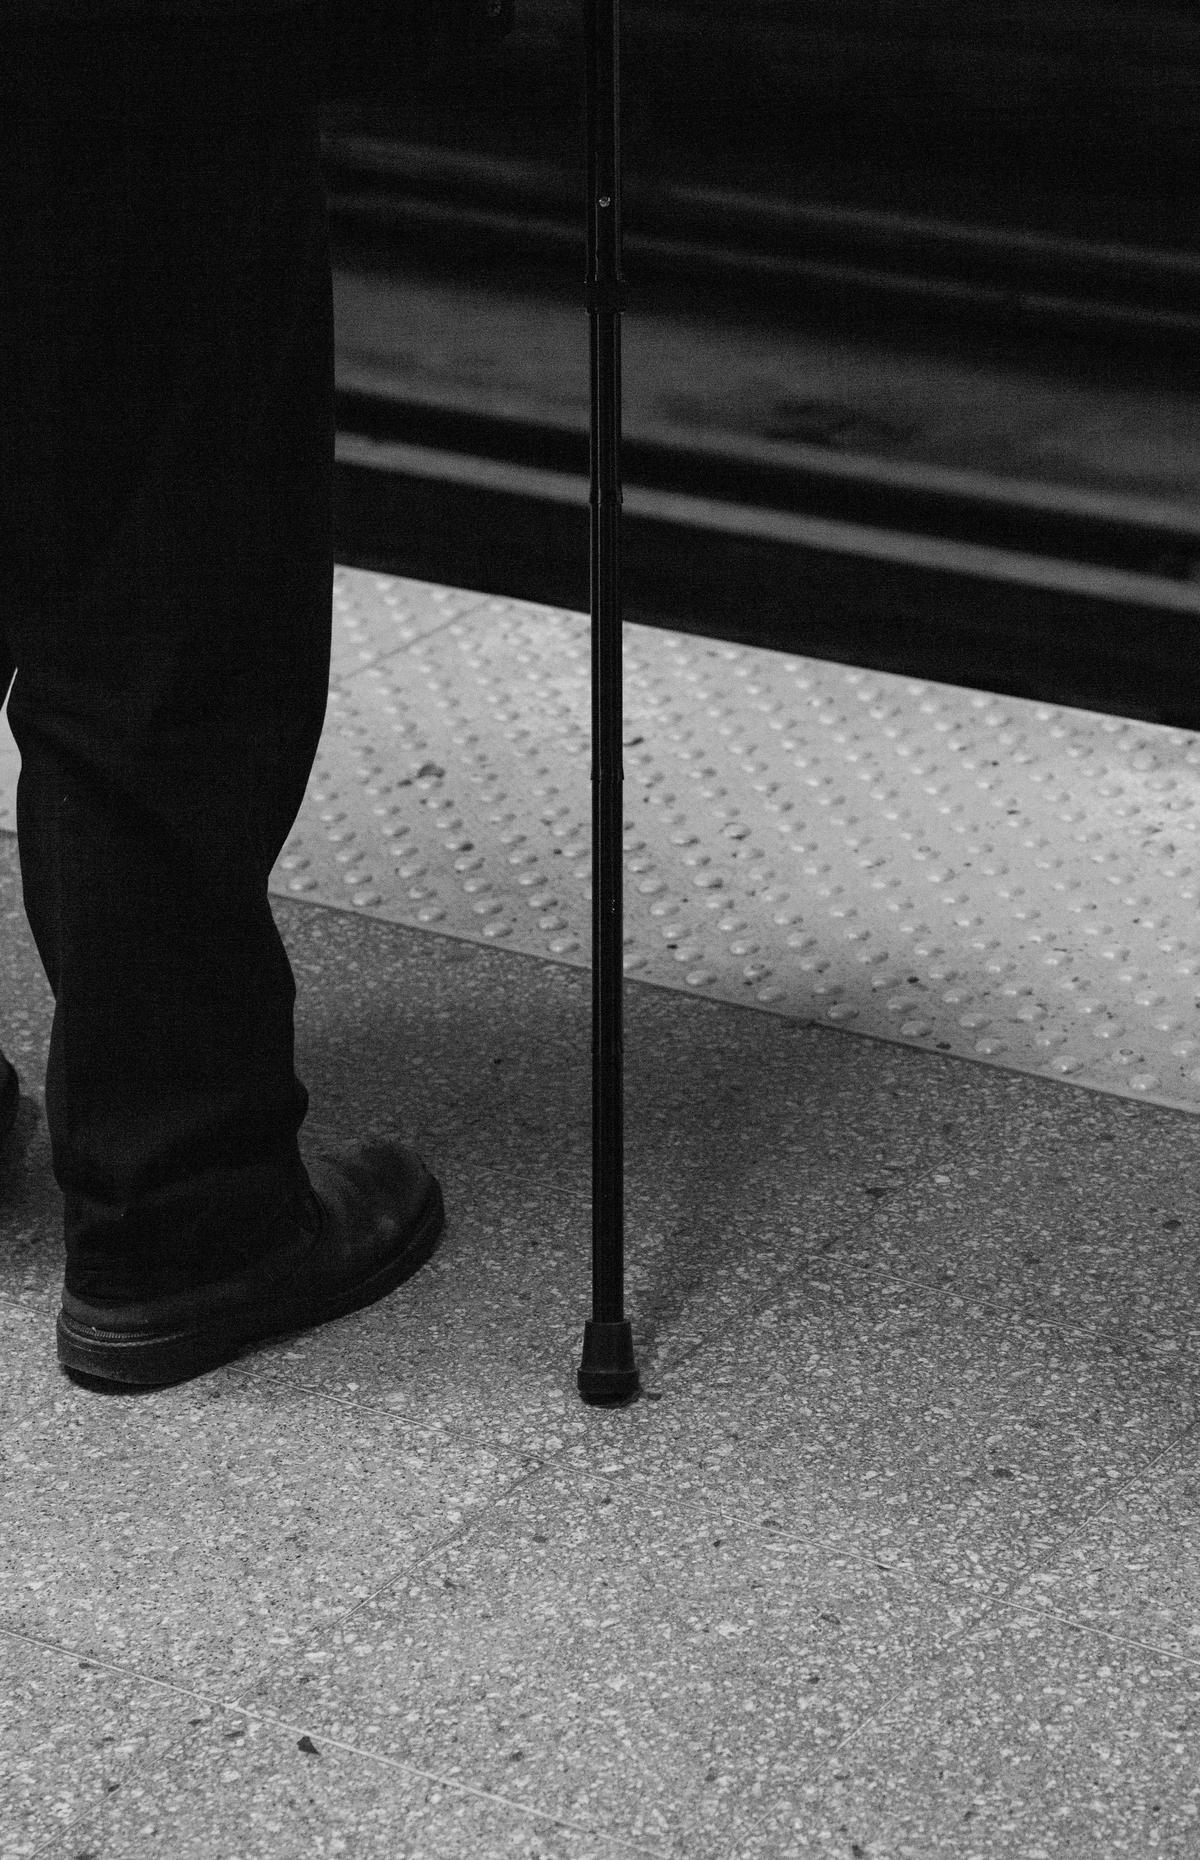 A person using a cane to climb stairs while holding onto a handrail